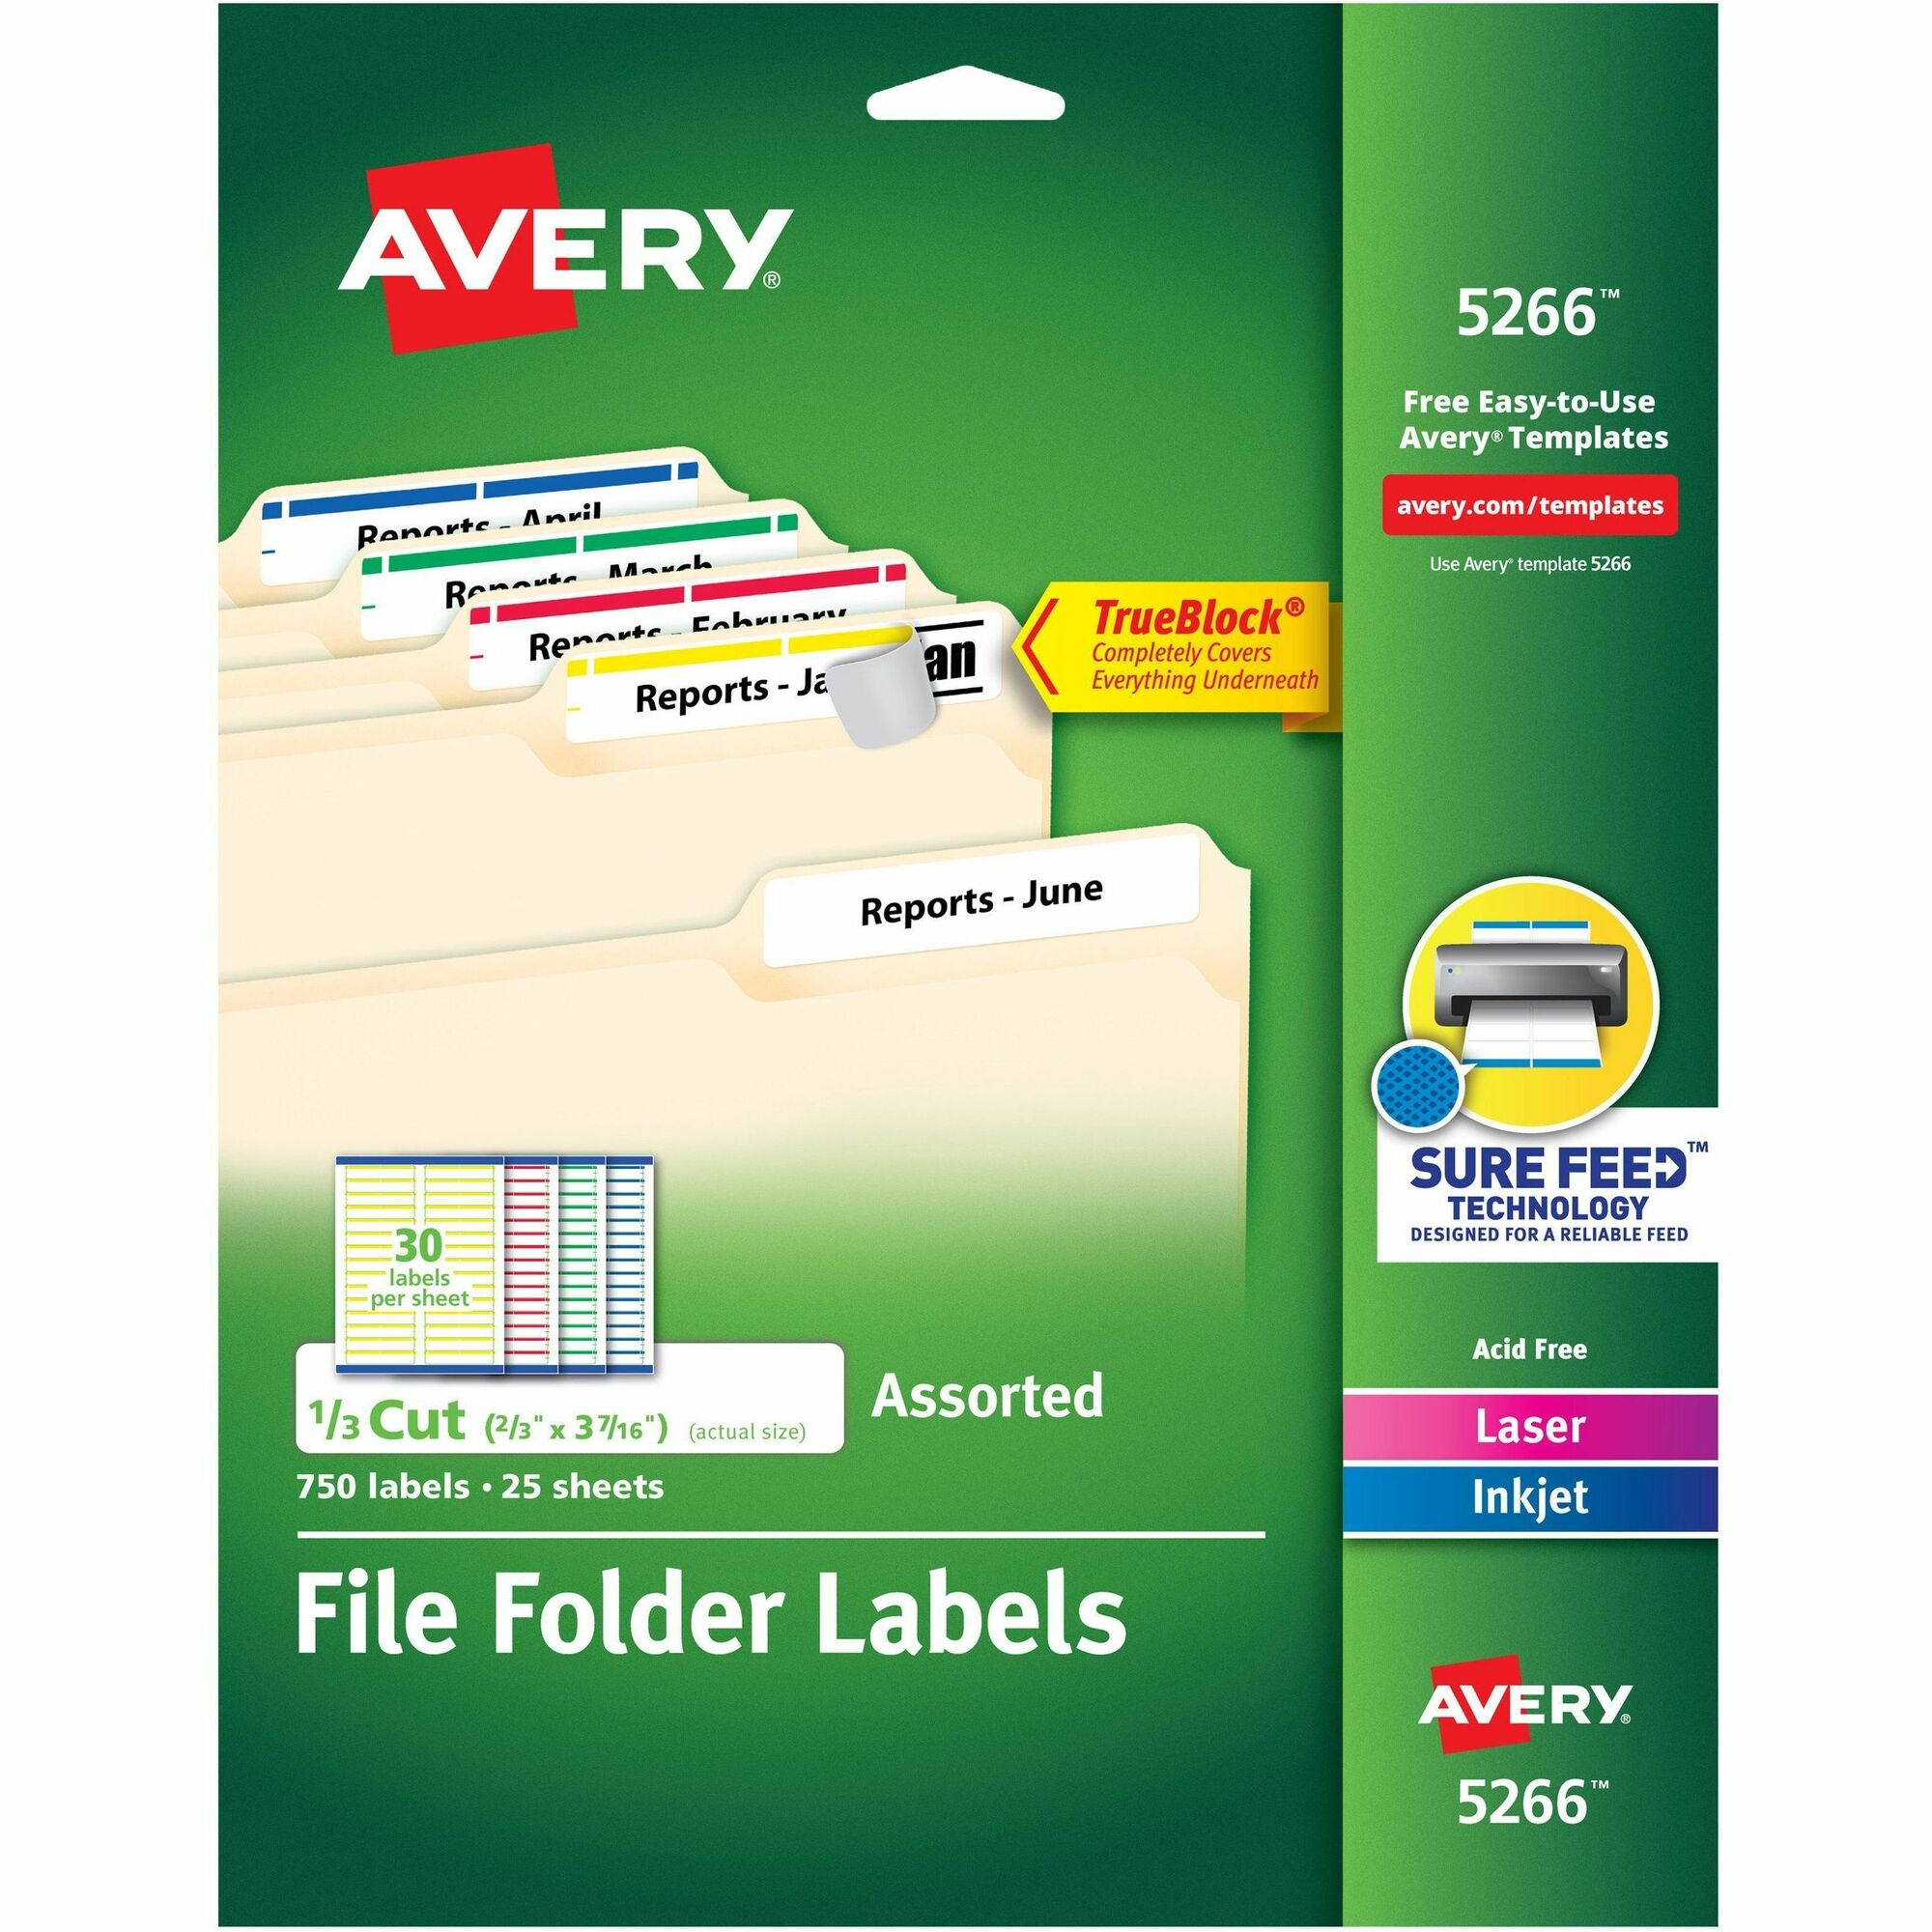 how-to-print-avery-labels-from-excel-spreadsheet-damerbud